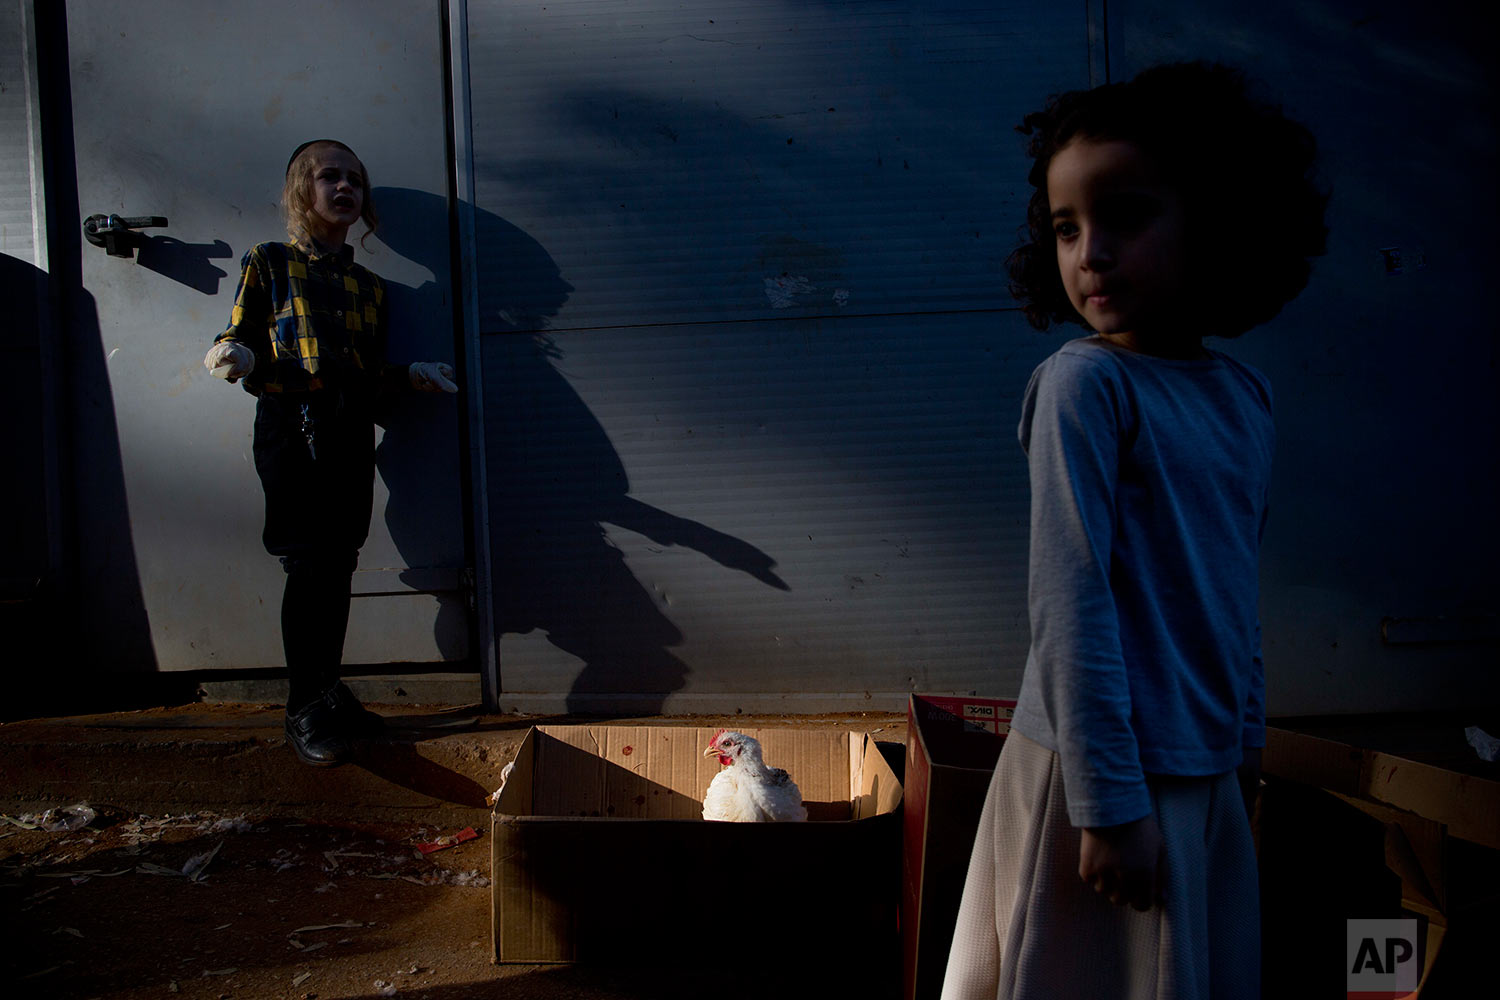  An ultra-Orthodox Jewish youth stands next to his chicken during the Kaparot ritual in Bnei Brak, Israel, Thursday, Sept. 28, 2017. (AP Photo/Oded Balilty) 